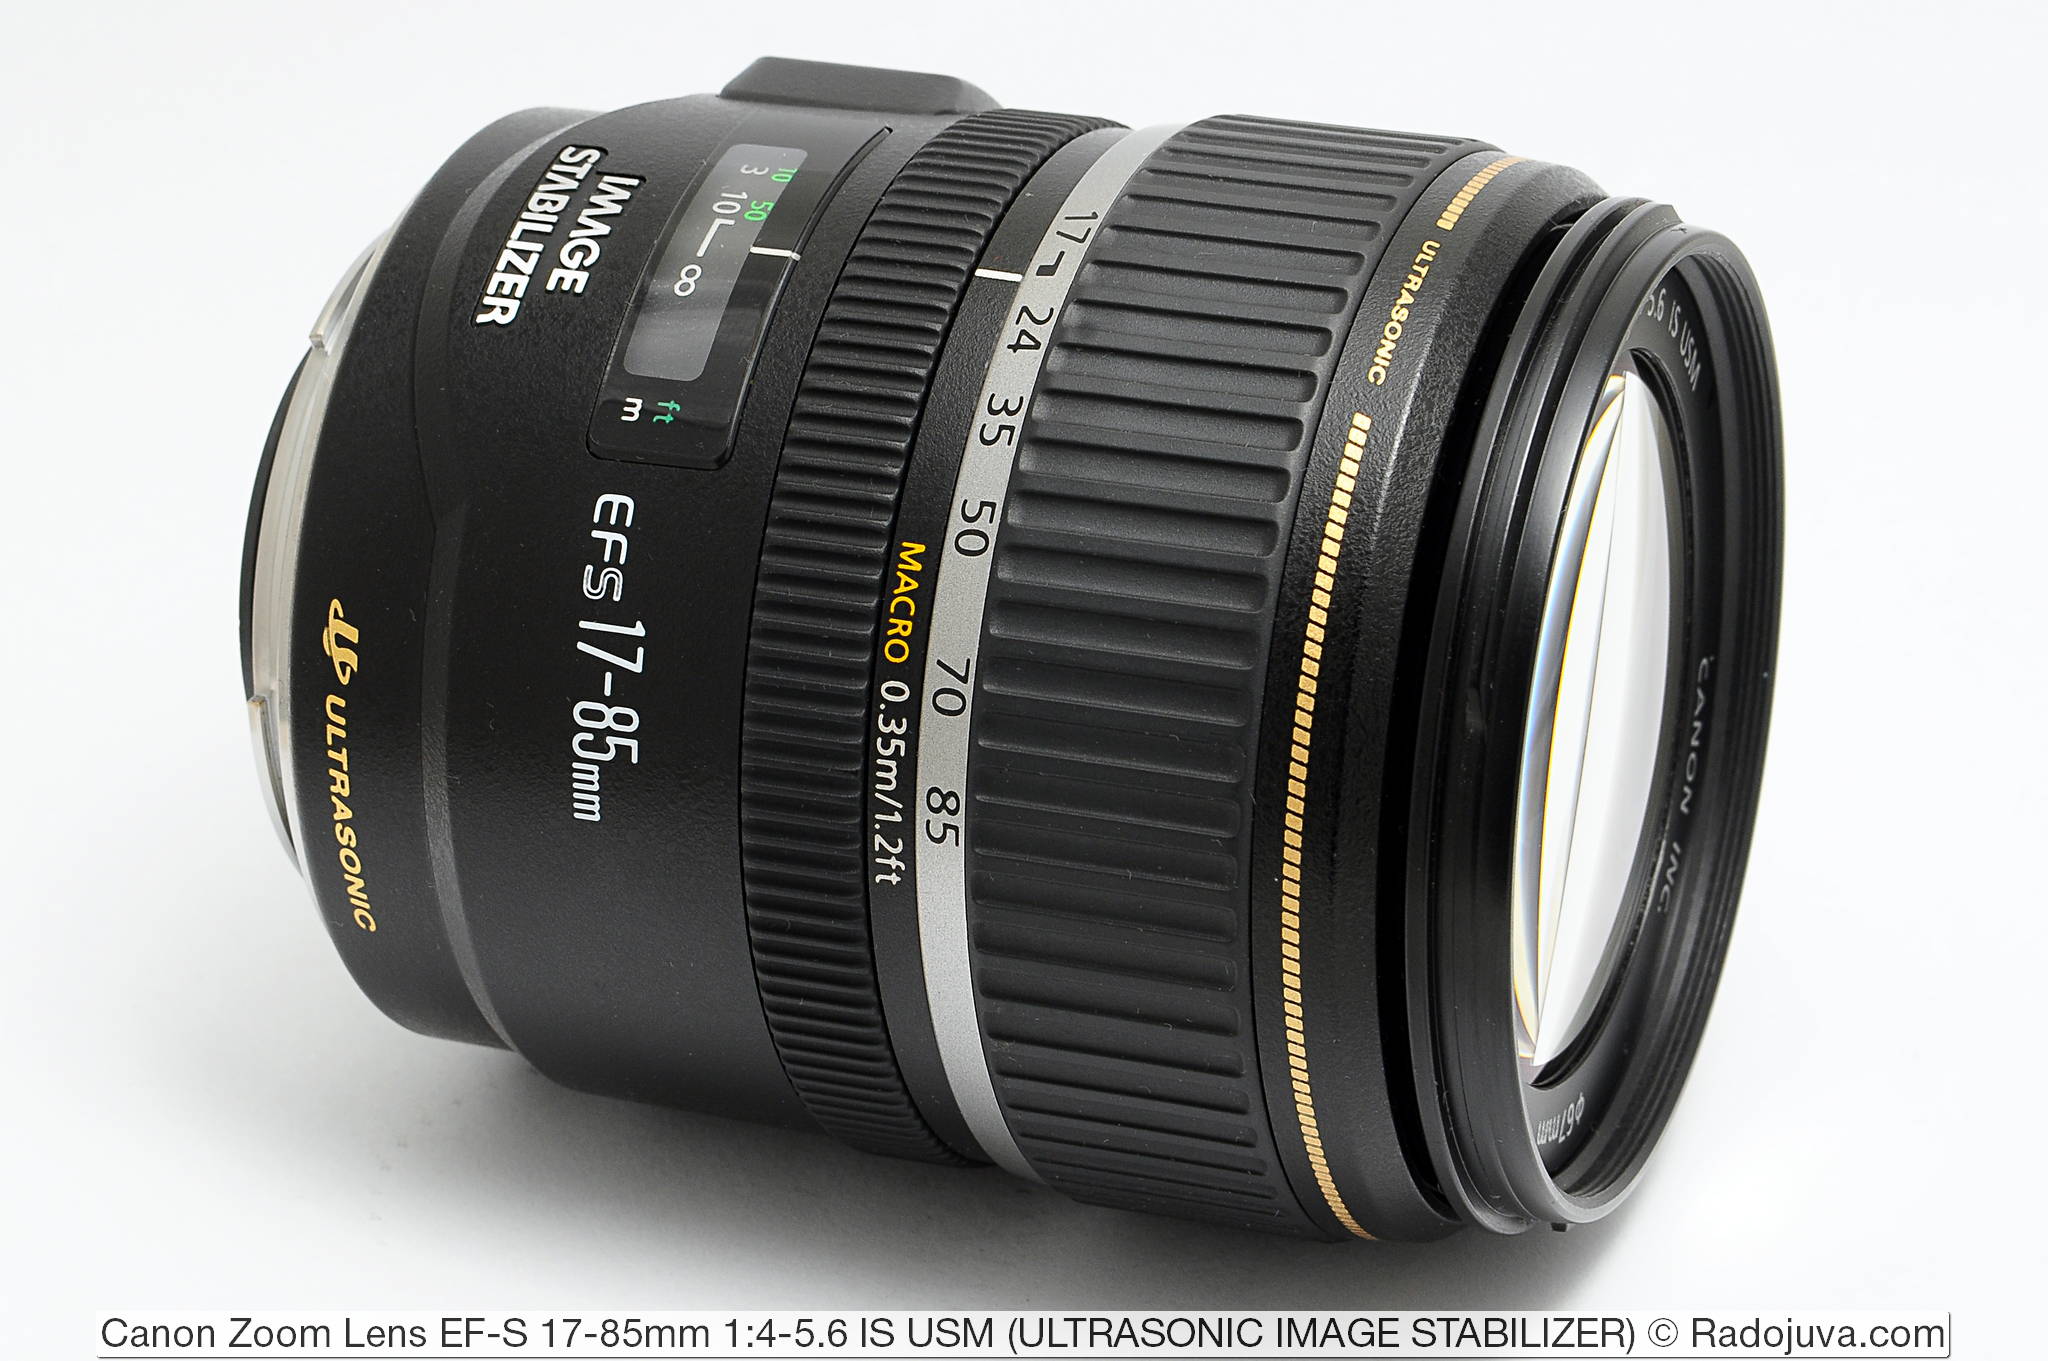 Review of Canon Zoom Lens EF-S 17-85mm 1: 4-5.6 IS USM | Happy